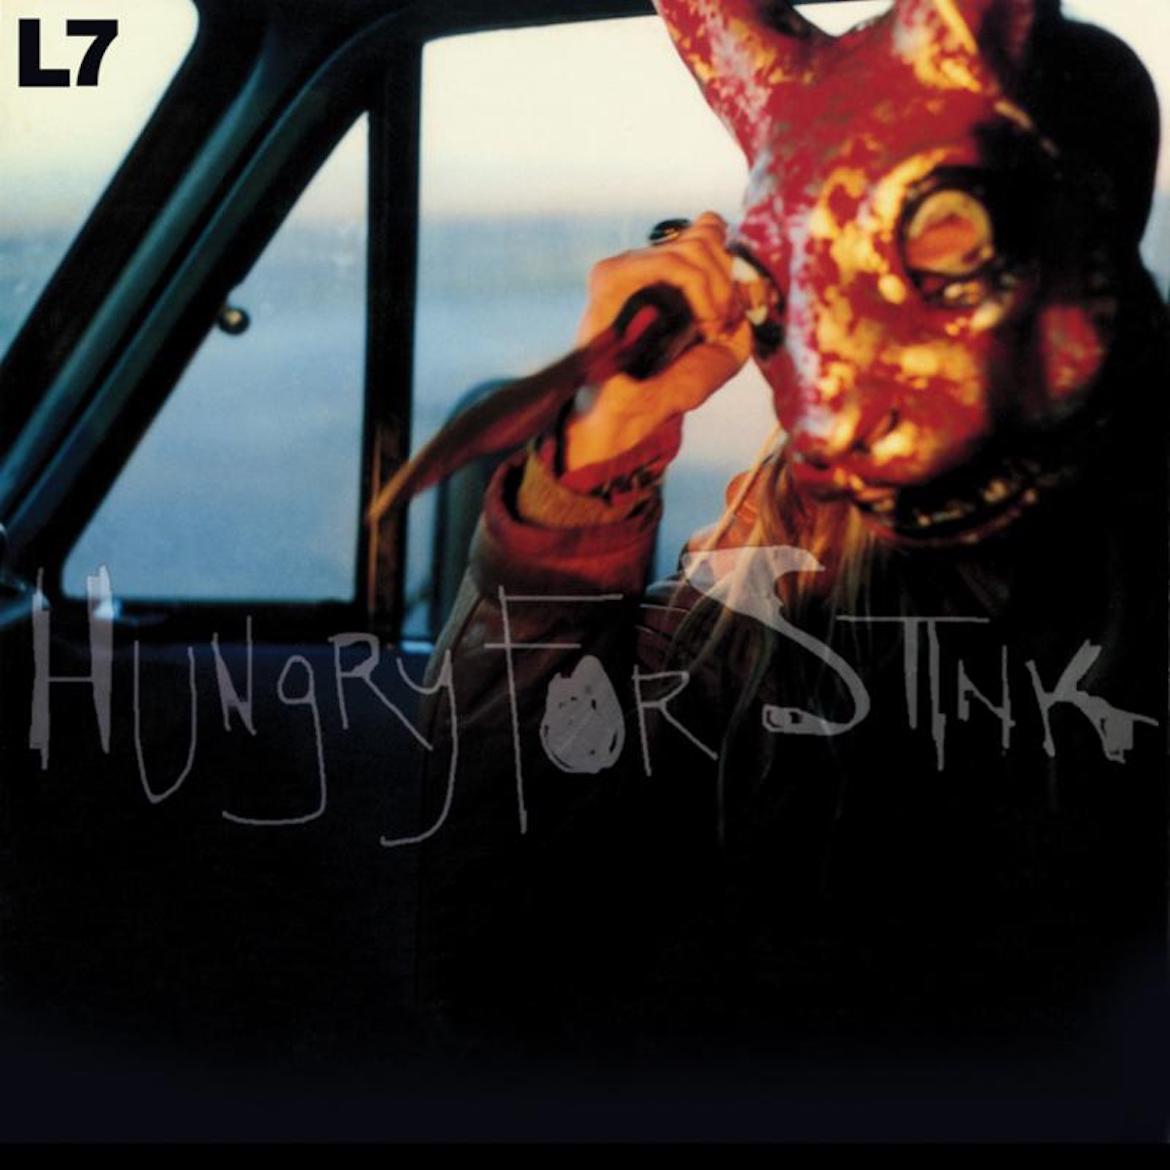 Hungry For Stink Album Cover from L7